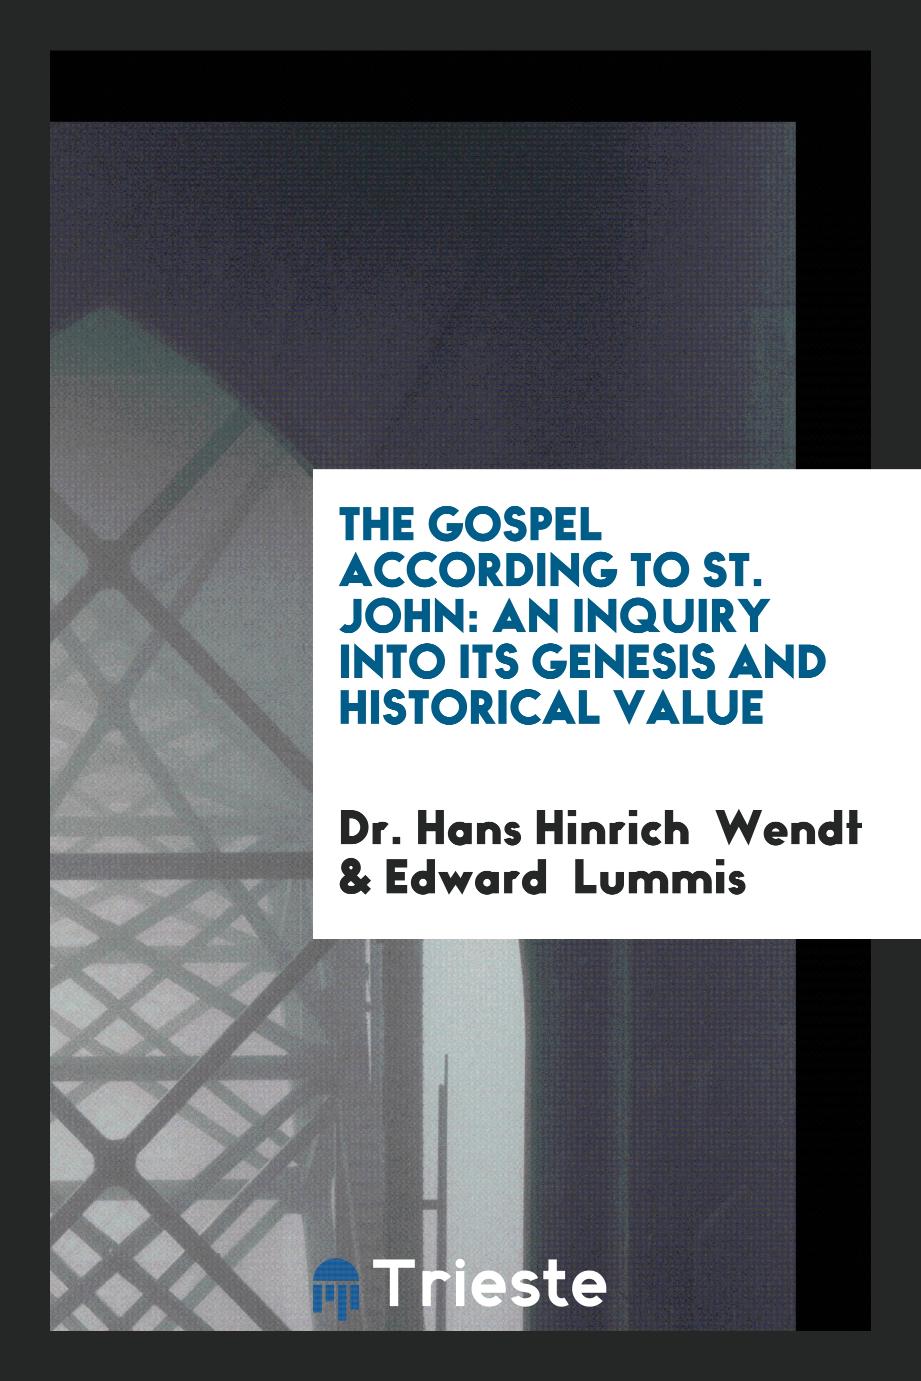 The Gospel According to St. John: An Inquiry into Its Genesis and Historical Value